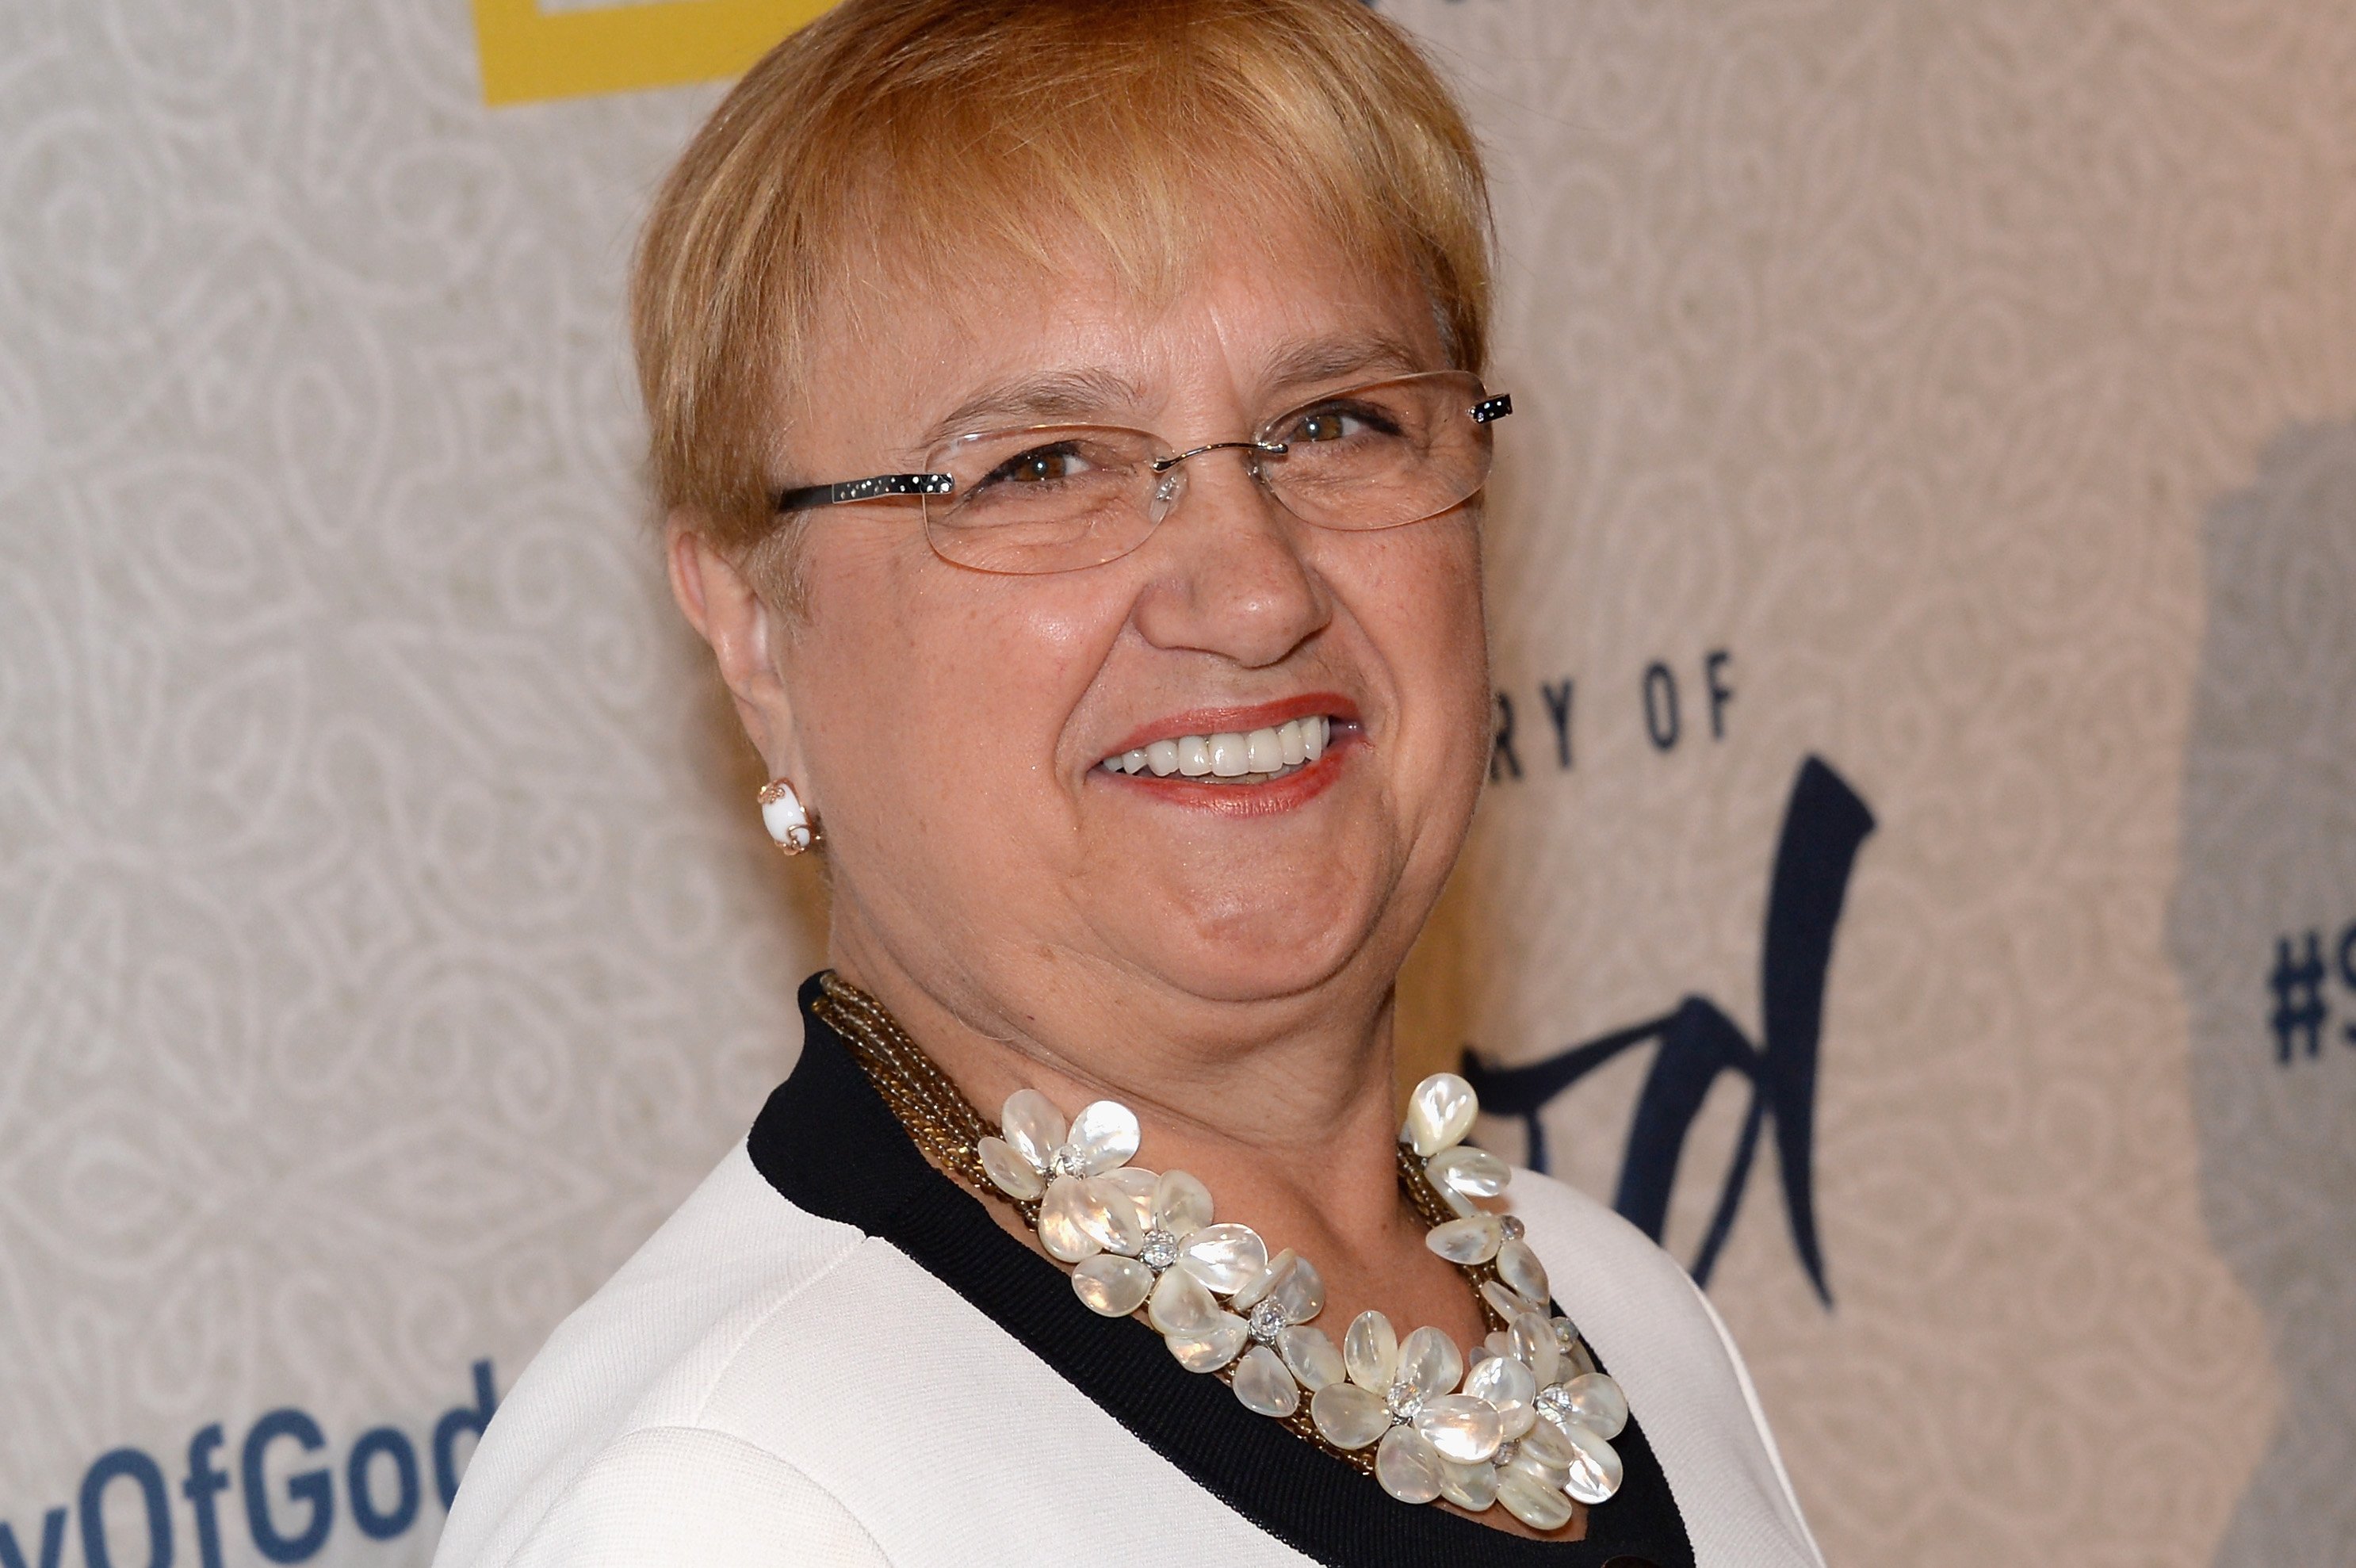 Celebrity chef Lidia Bastianich smiles for the camera at a 2016 event.